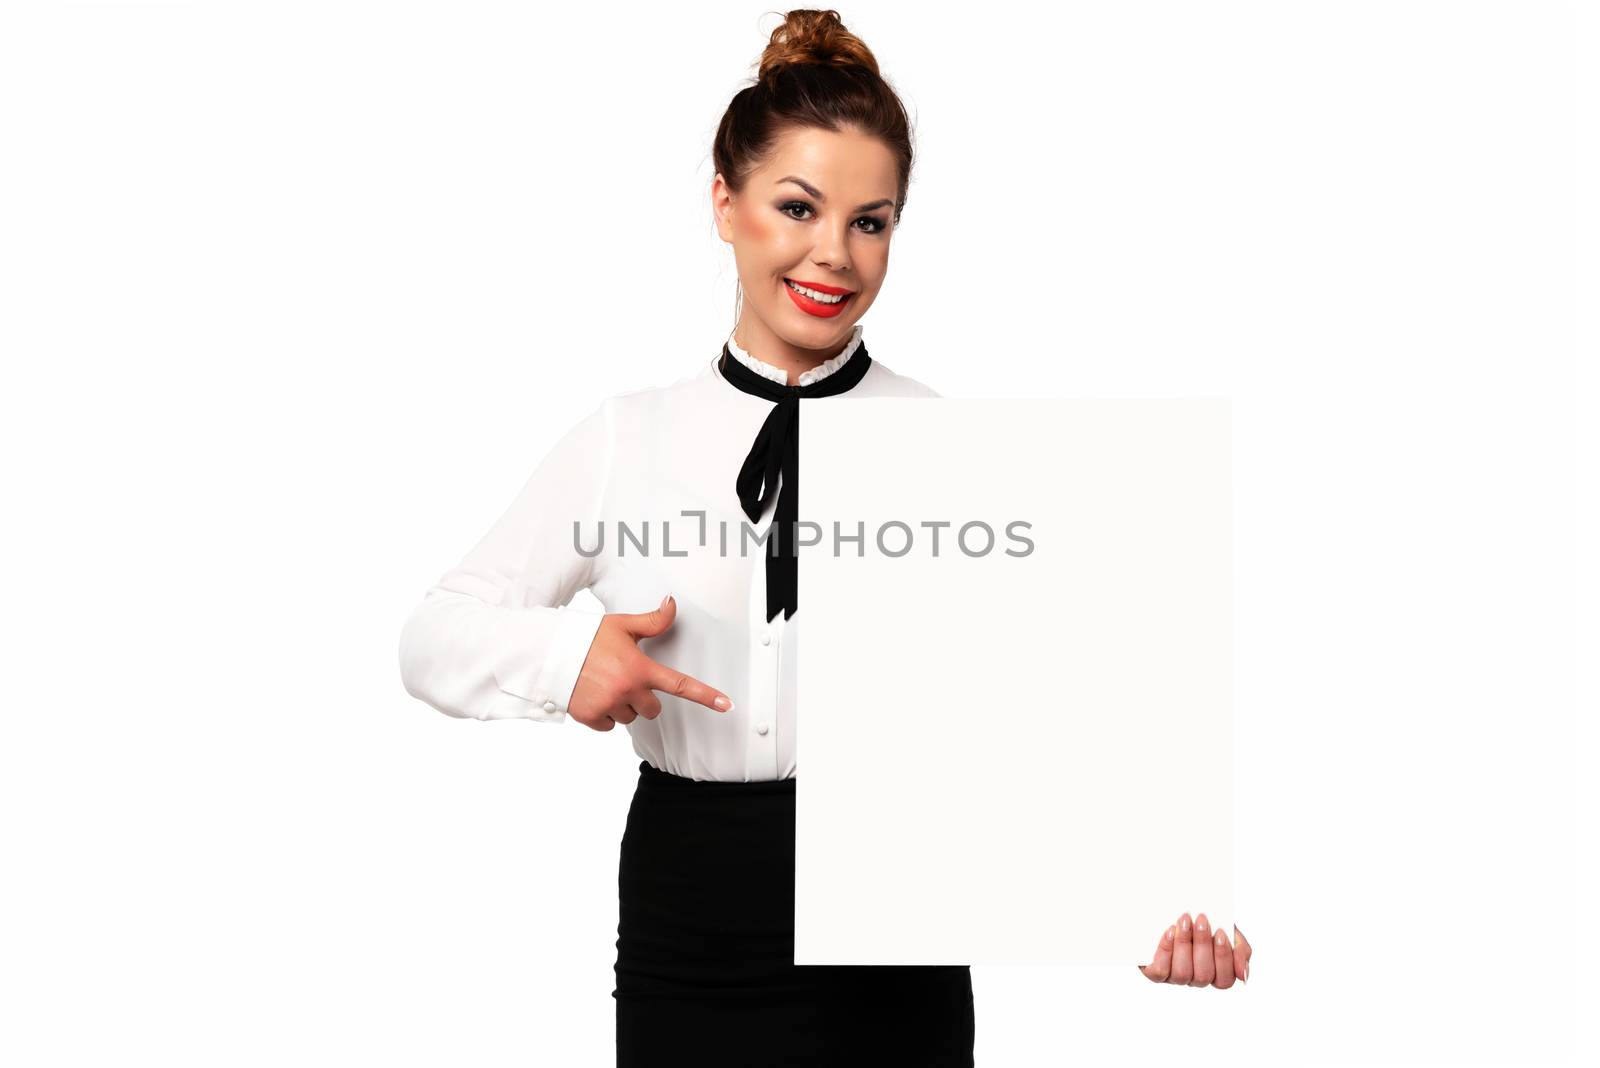 Beautiful business woman smiling and holding a white sign board with copy space for advertising and text on a white background.